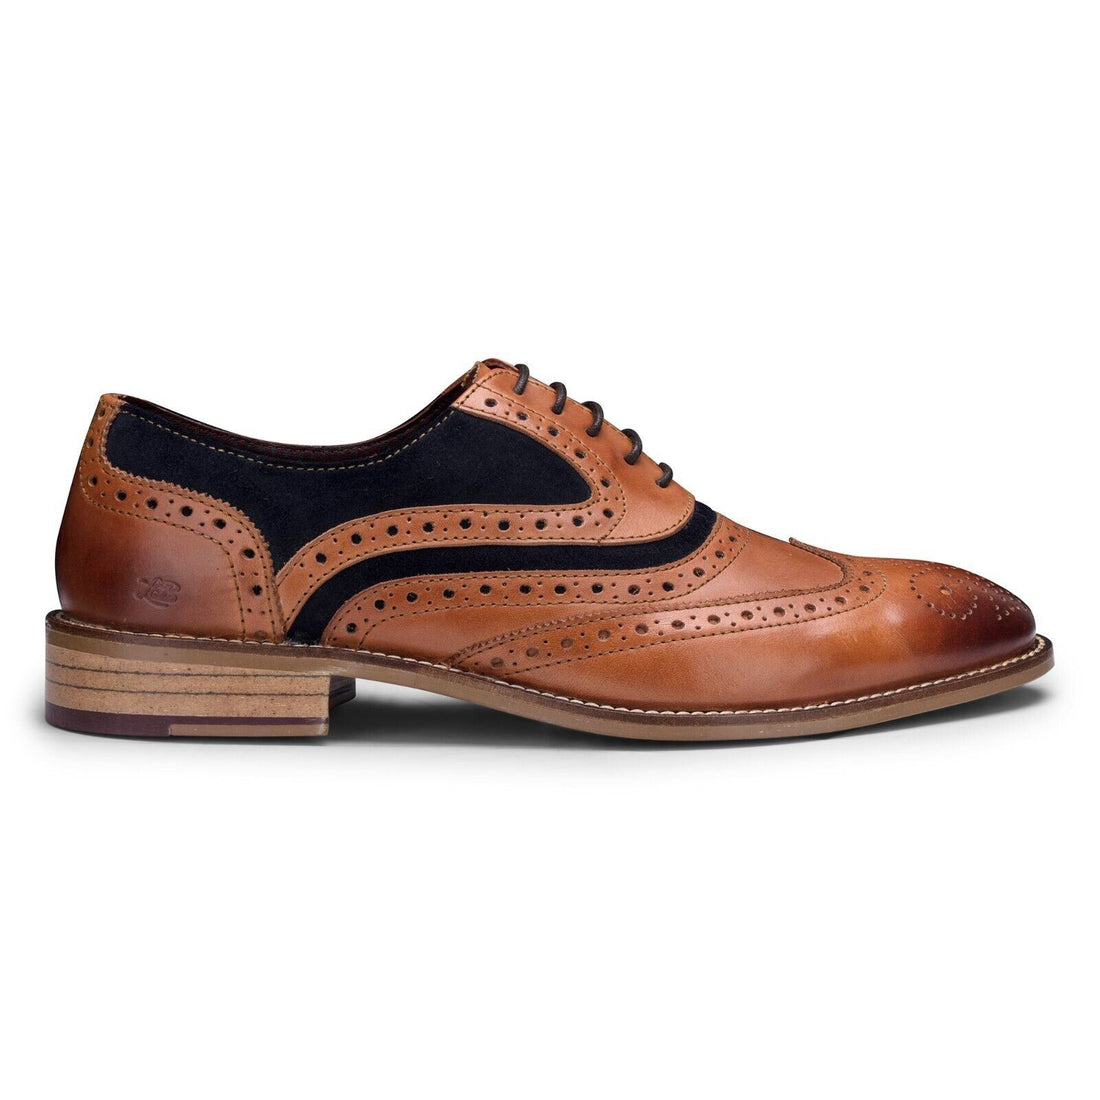 Mens Classic Oxford Tan Leather Gatsby Brogue Shoes with Navy Suede